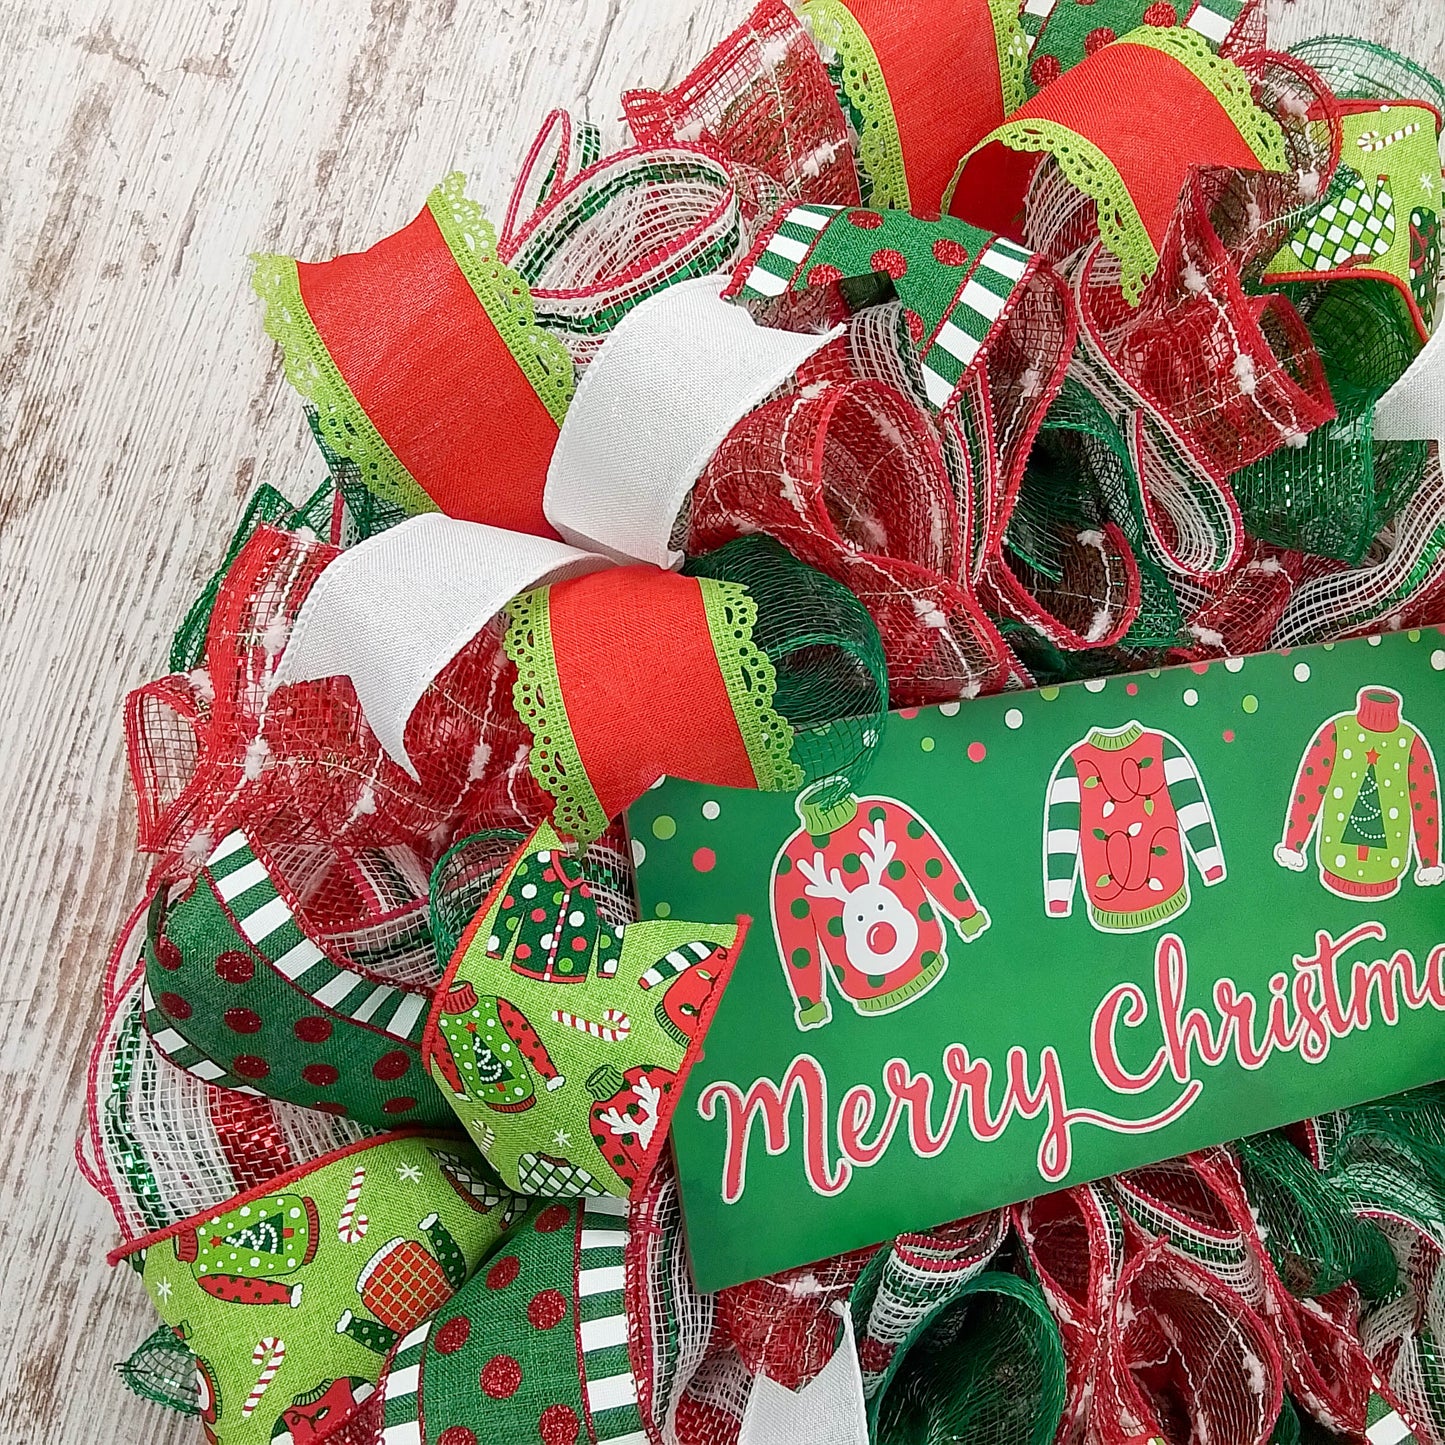 Ugly Christmas Sweater Wreath - Xmas Mesh Door Decor - Holiday Decorations - Red White Emerald Green